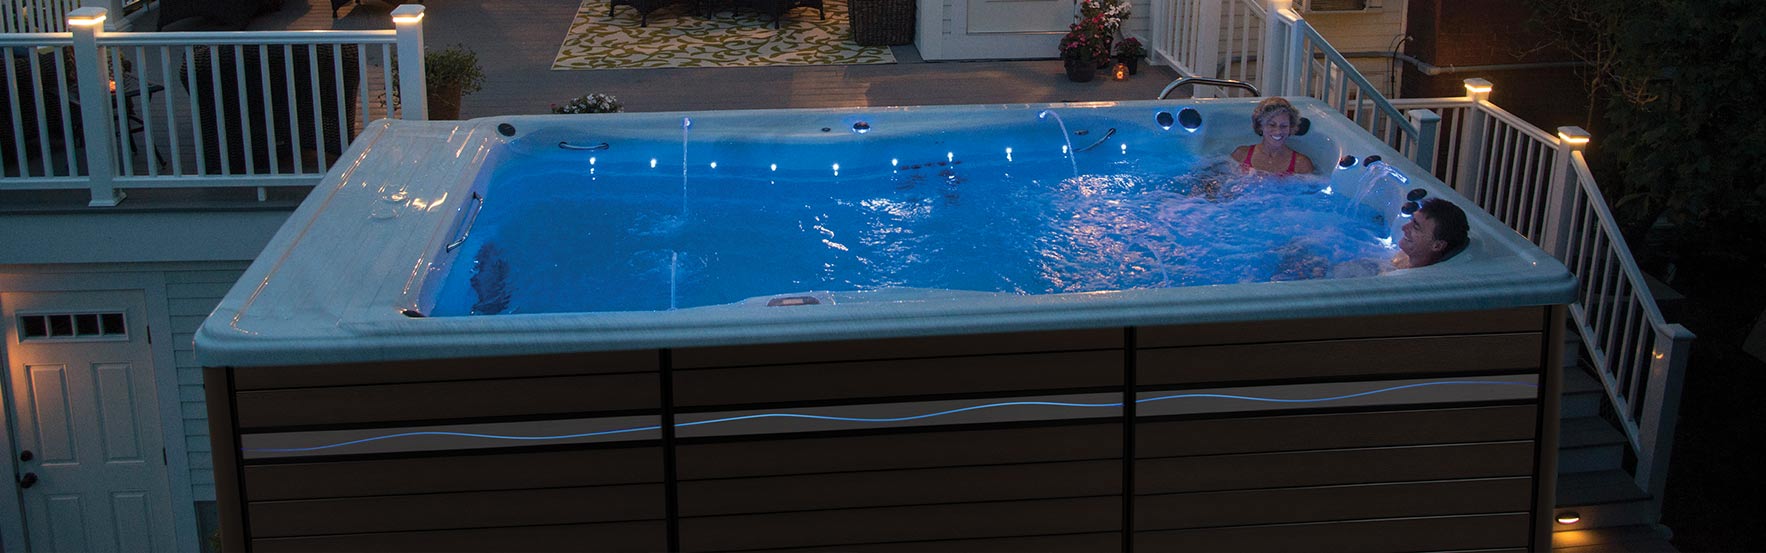 the Wavelight package on an h2x swim spa will light up your backyard for great mood lighting